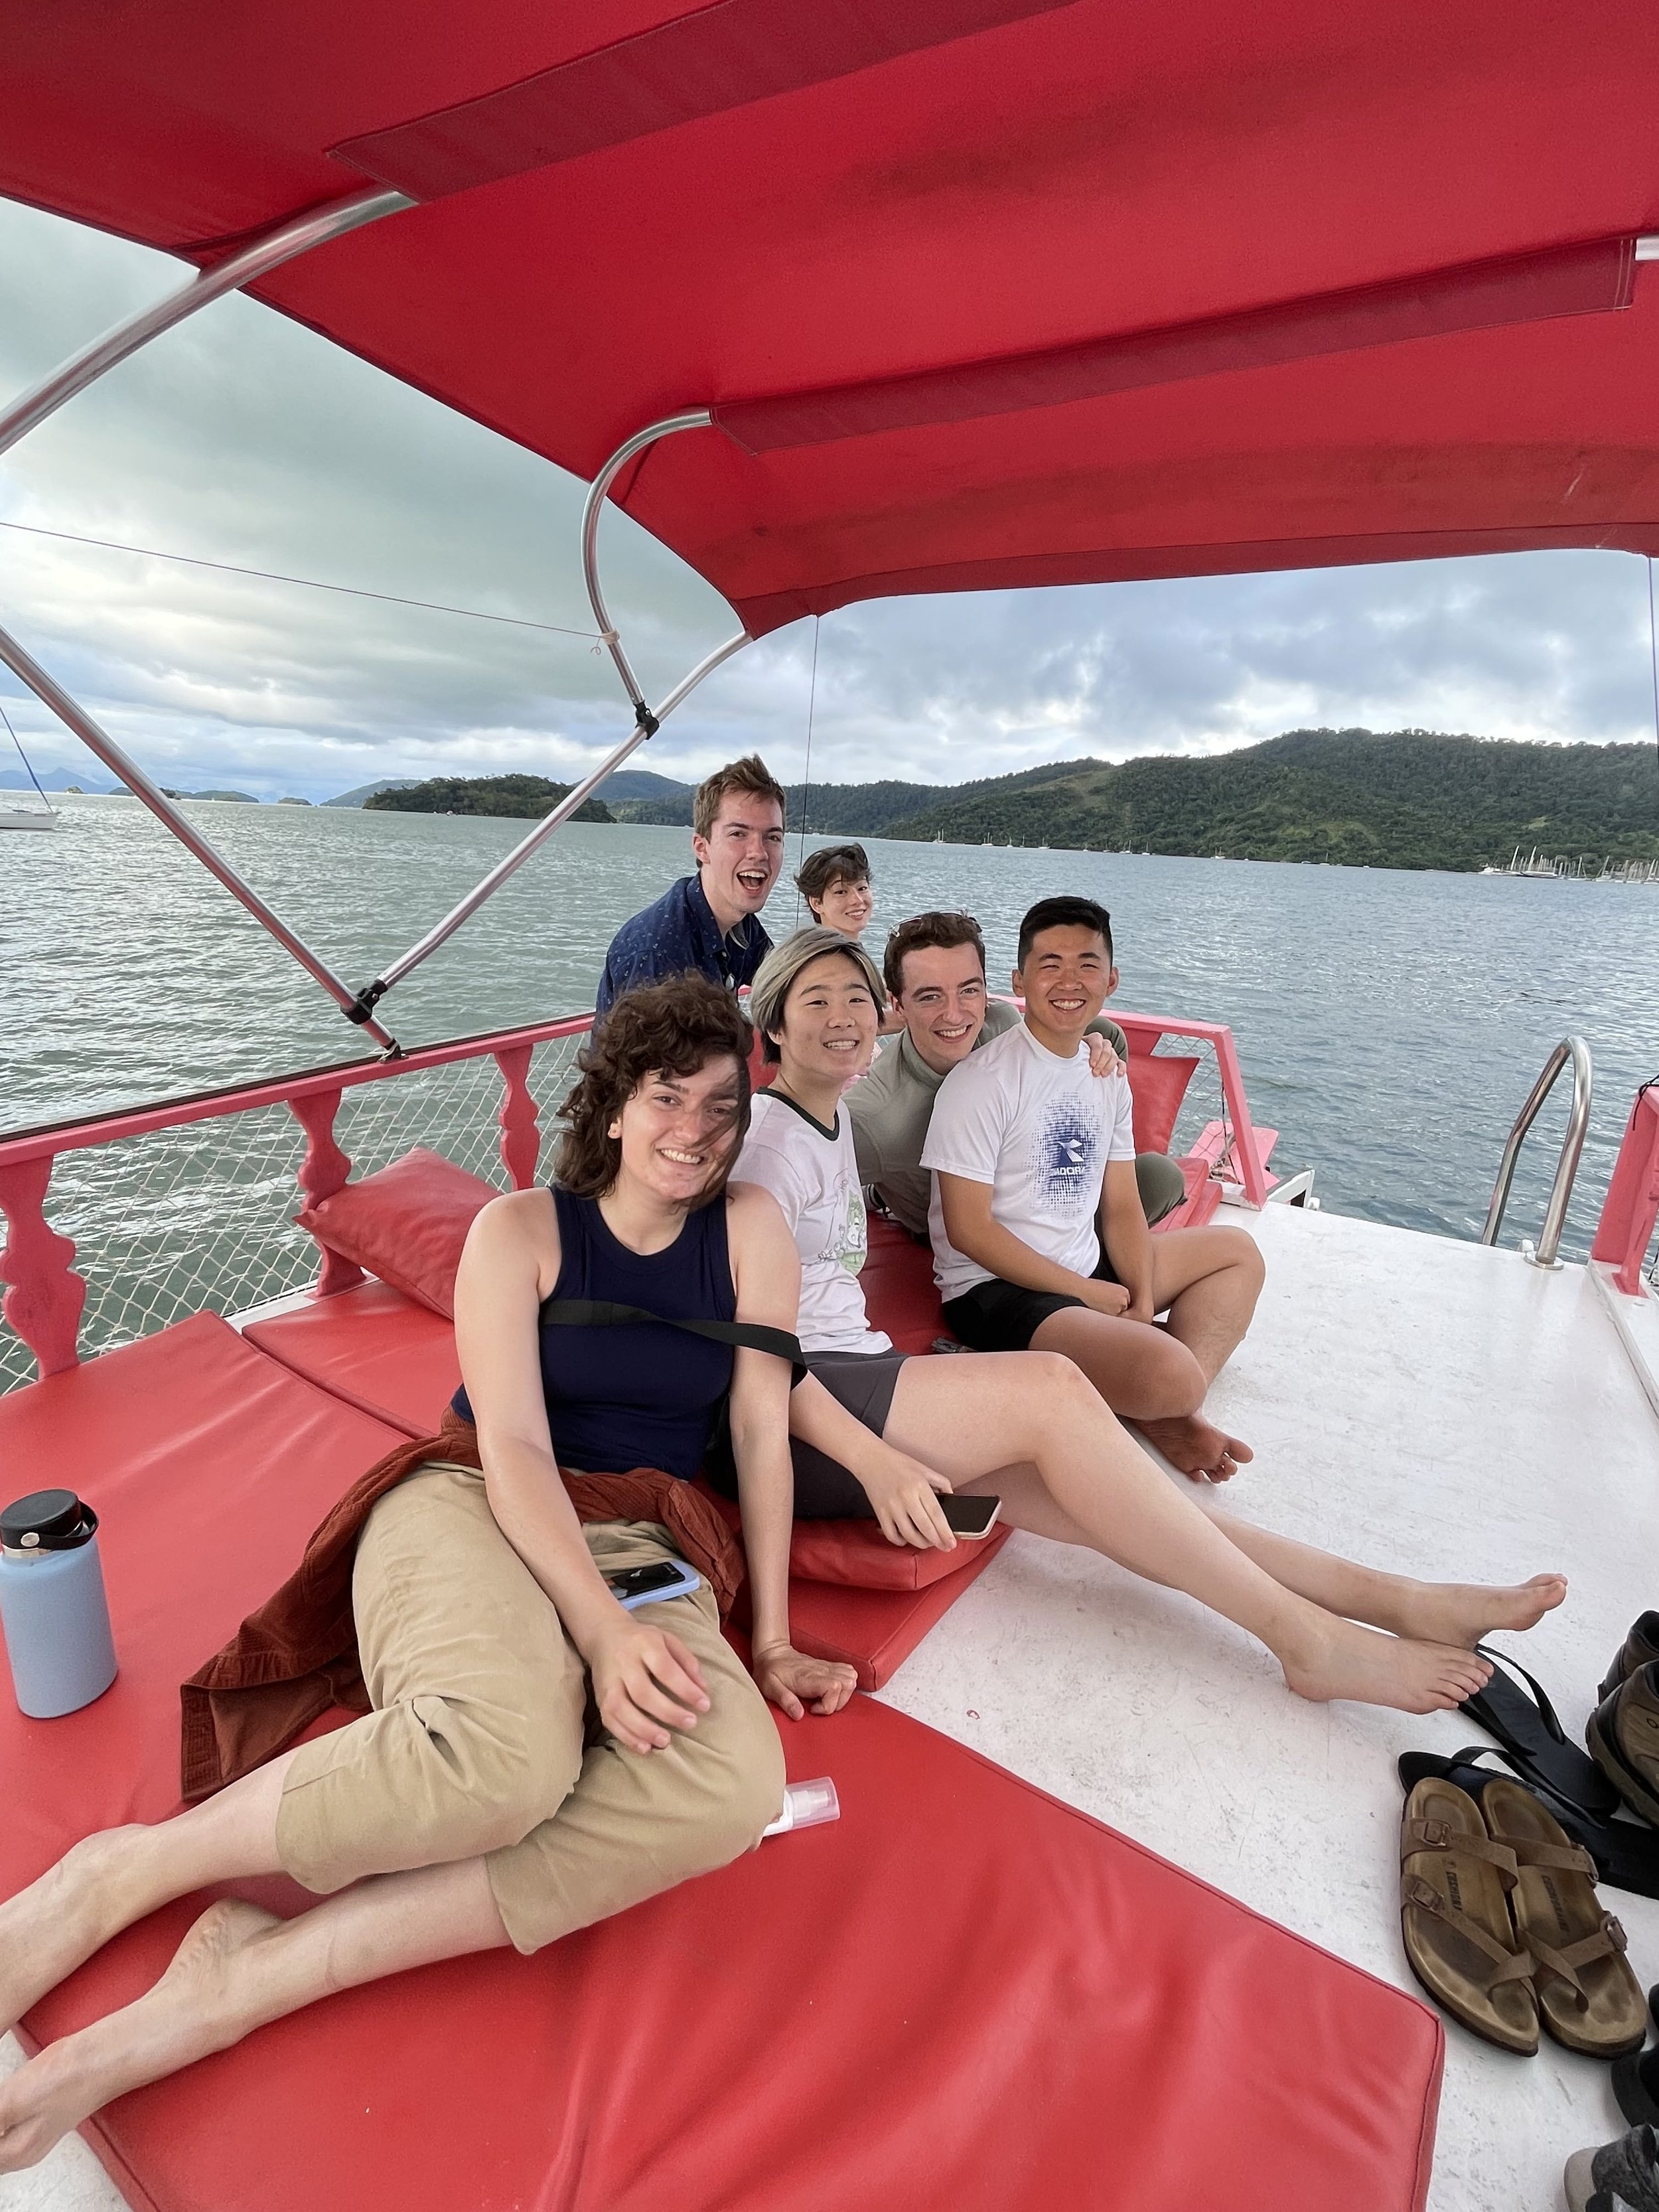  Enjoying a boat ride around the waters of Paraty! 